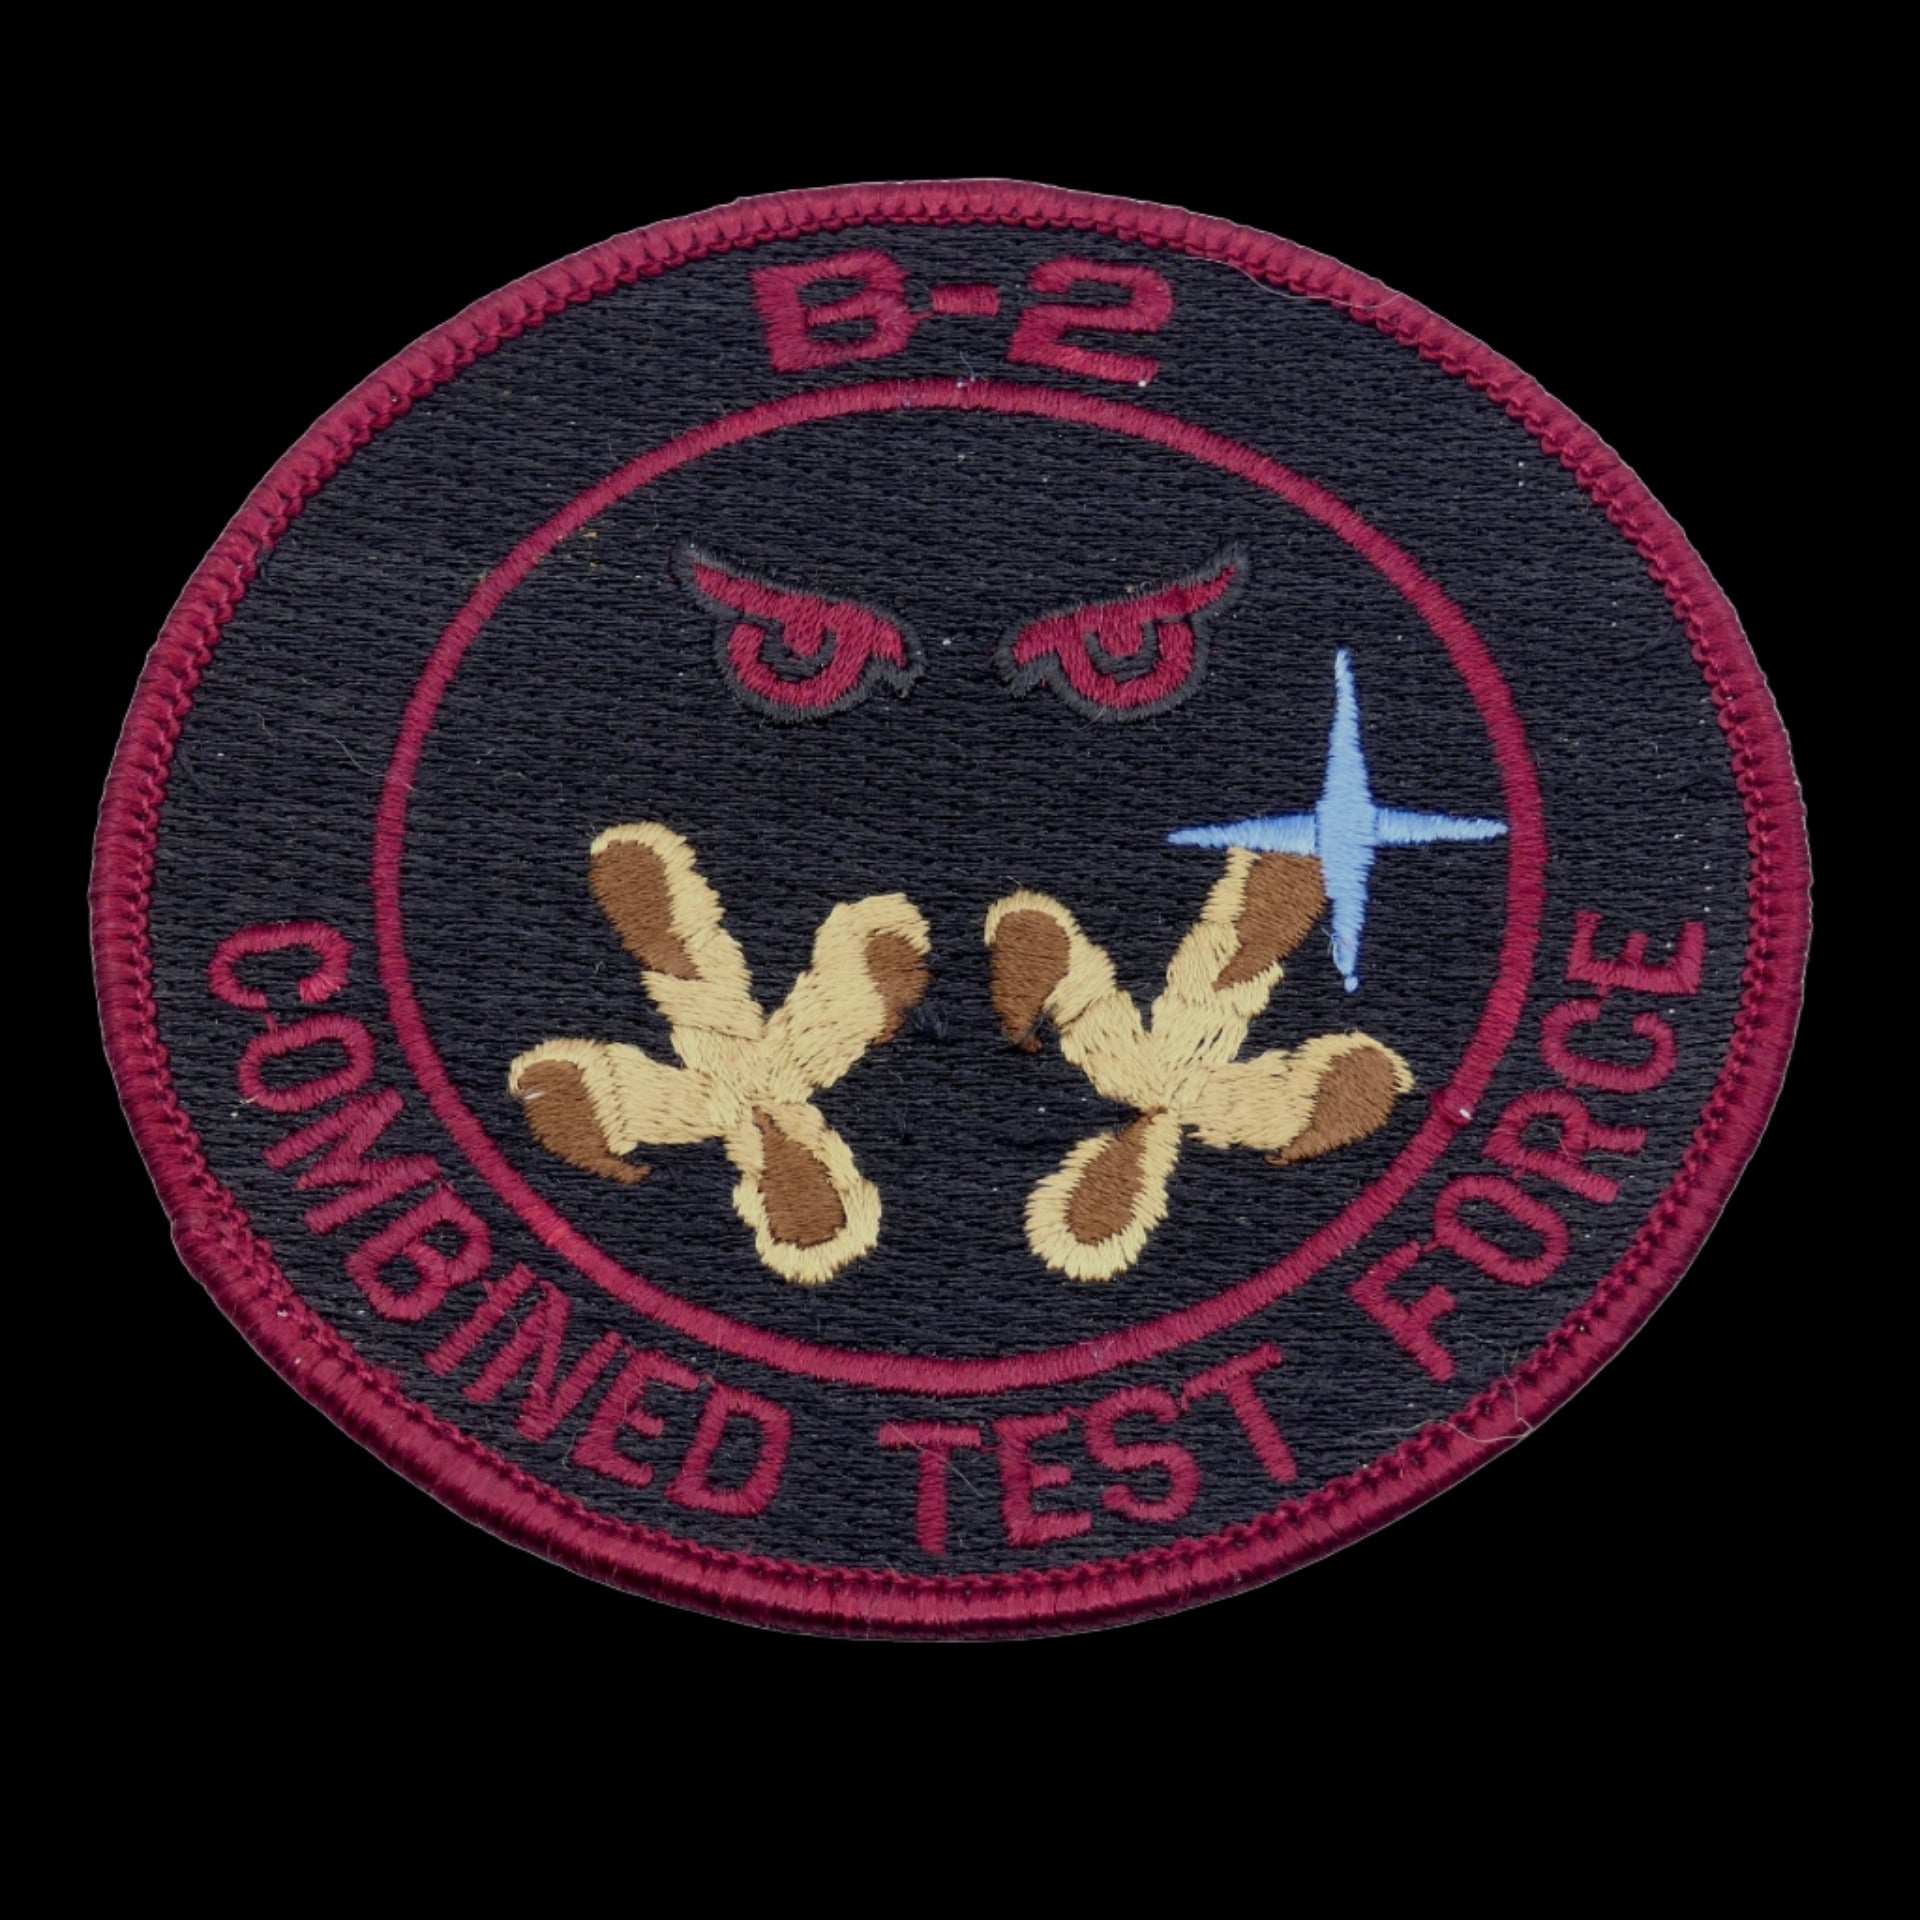 Military Memorabilia - B-2 Bomber Test Force Patch